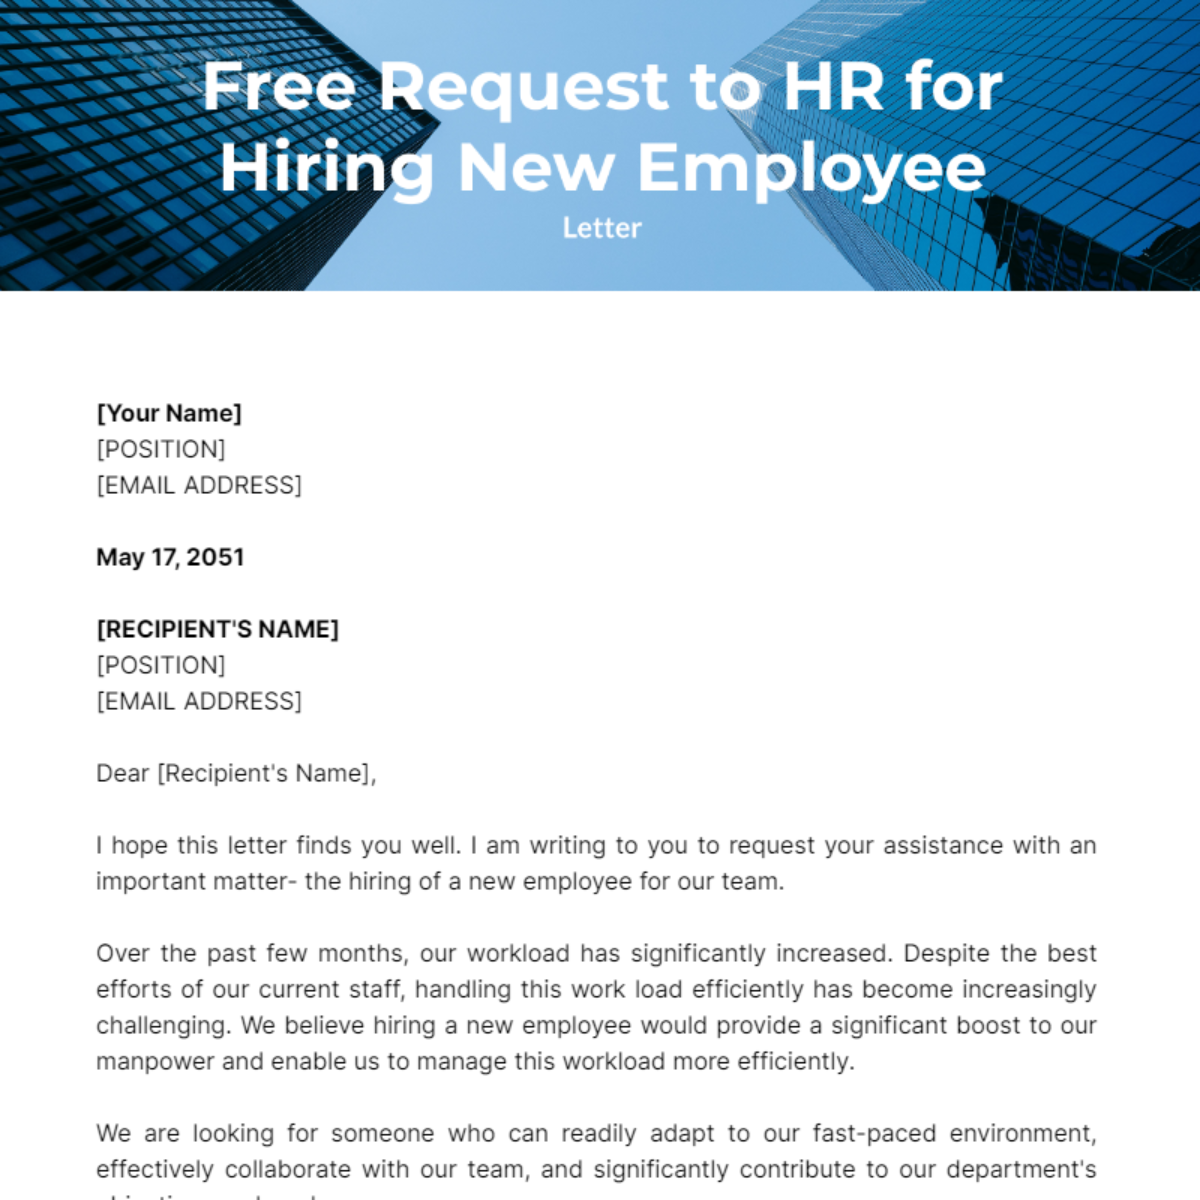 Request Letter to HR for Hiring New Employee Template